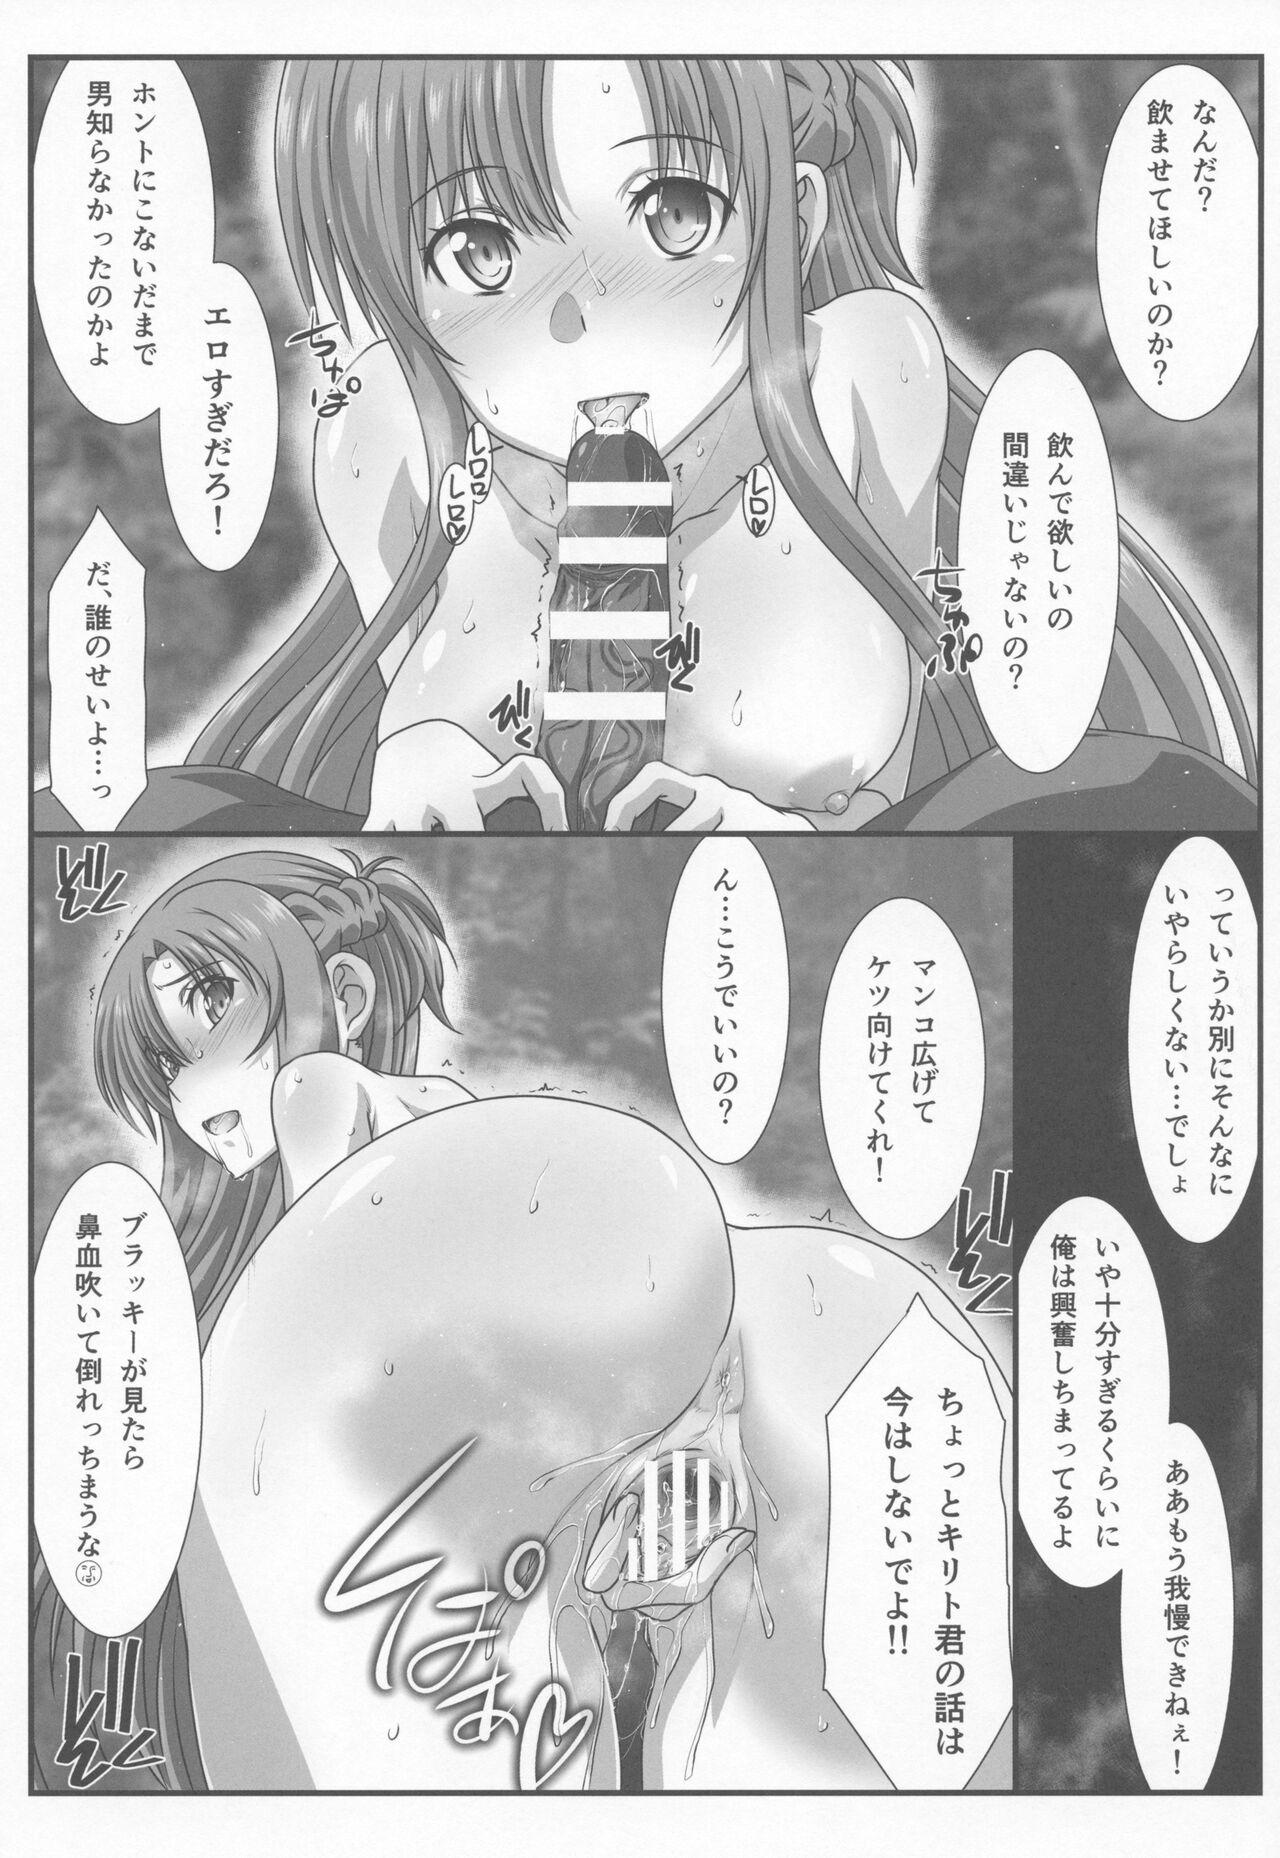 Shy Astral Bout Ver. 45 - Sword art online Blond - Page 8